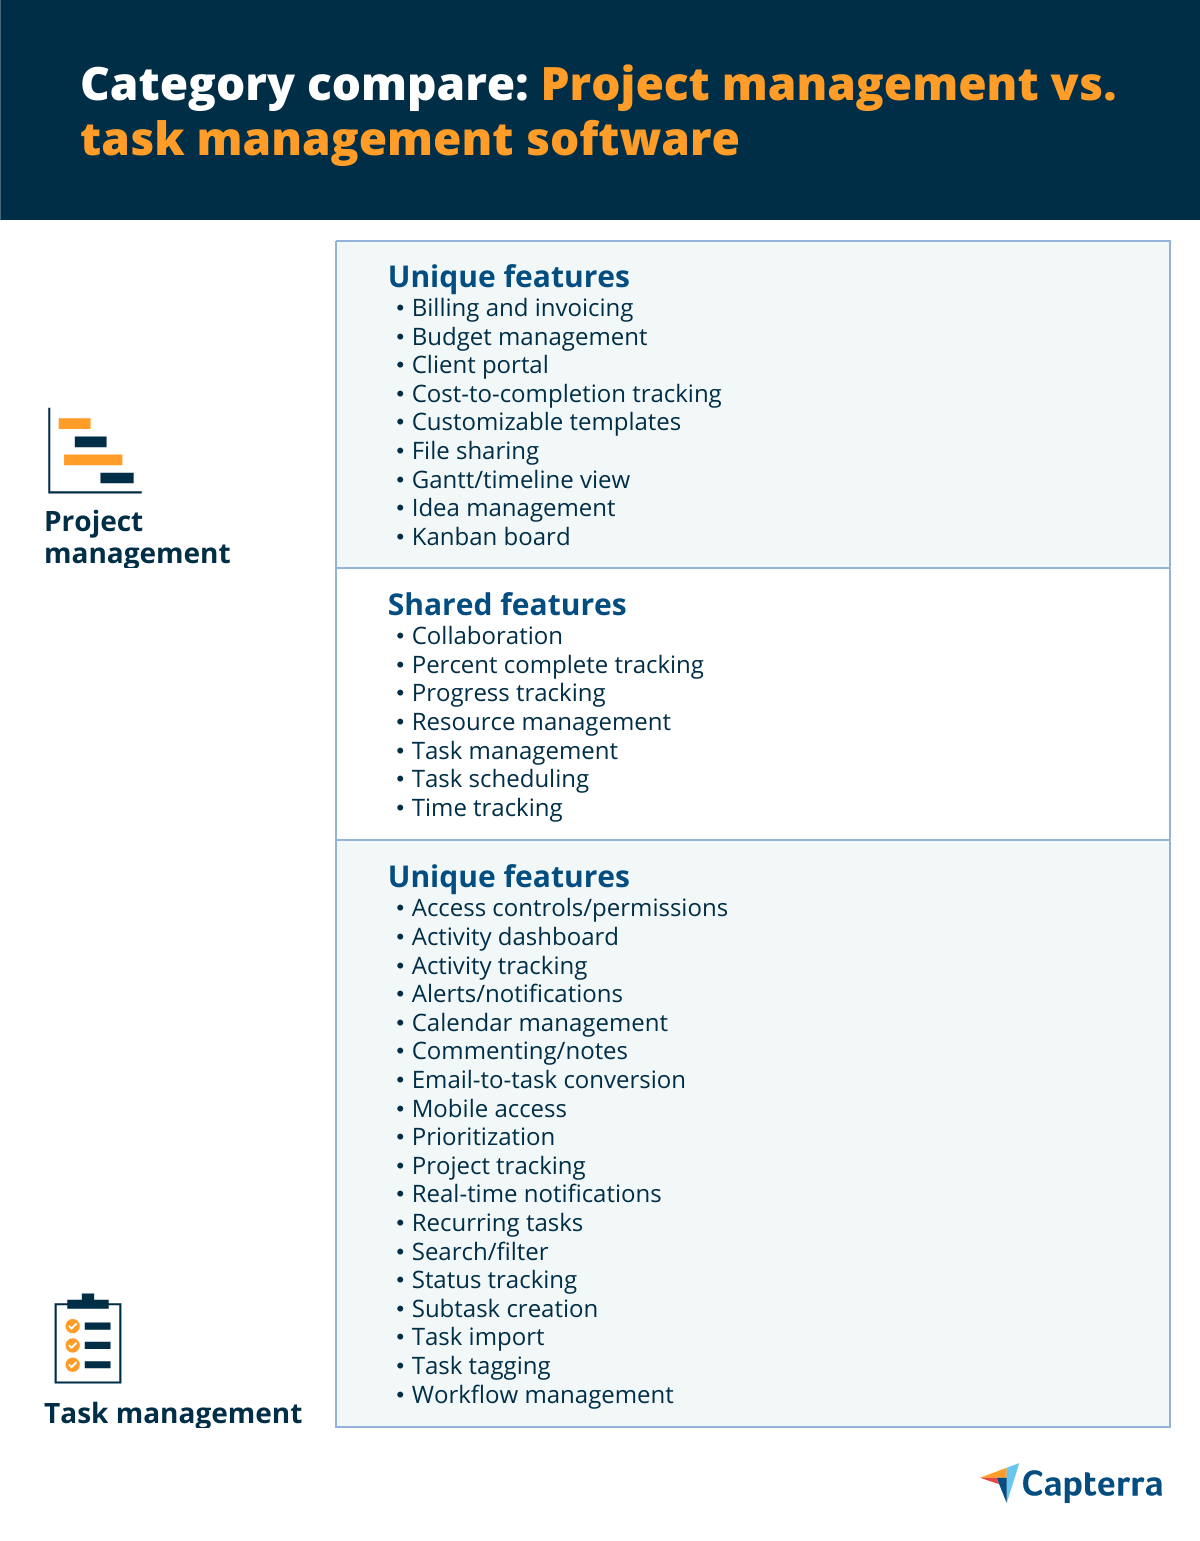 comparison table for the blog article "Category Compare: Project Management vs. Task Management Software"